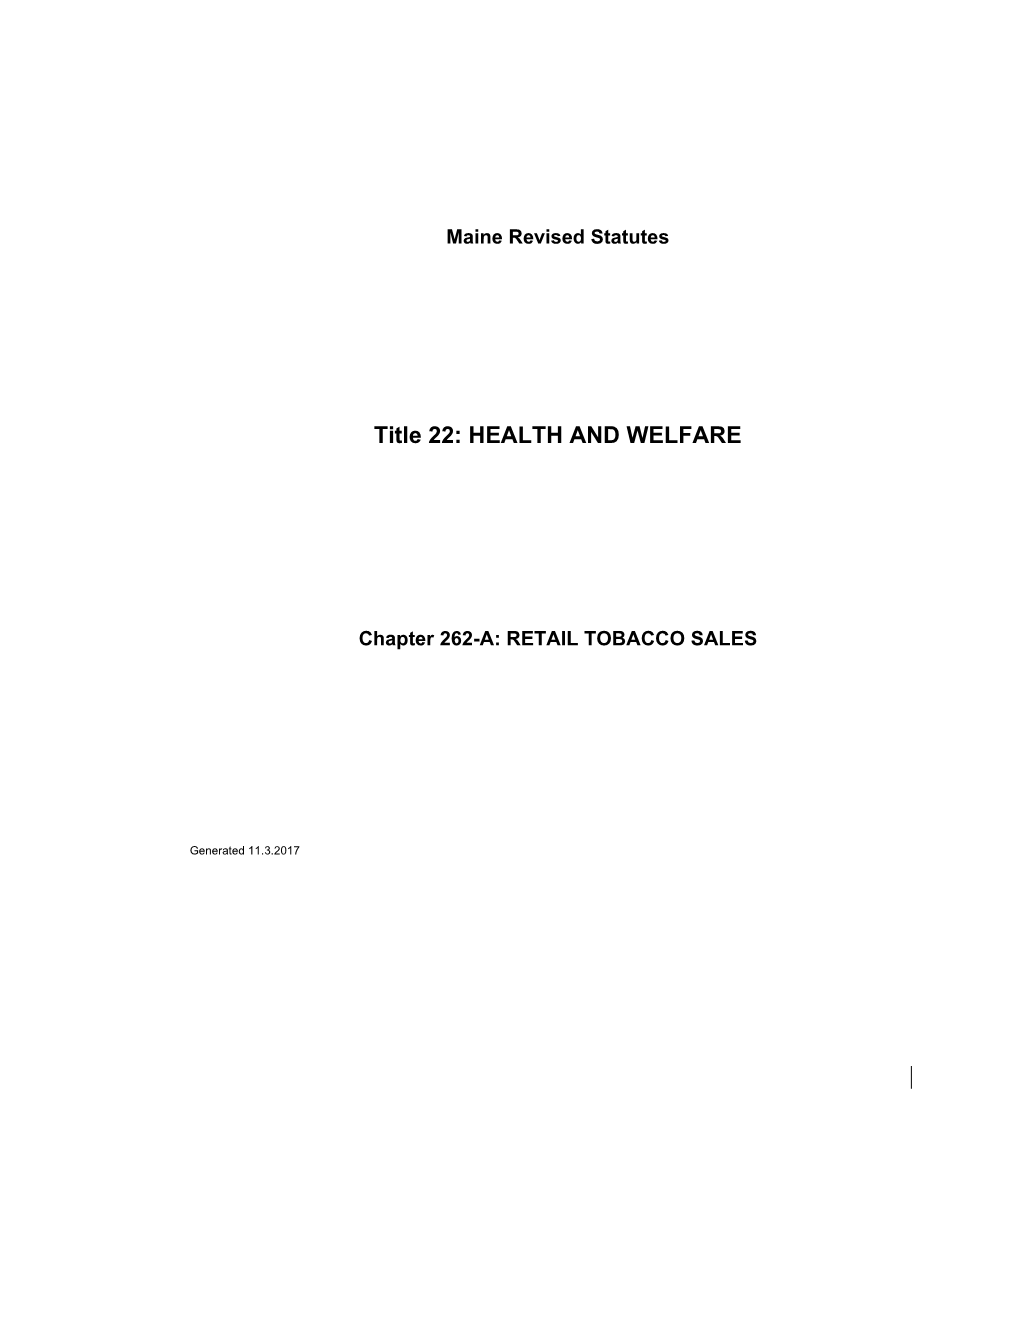 MRS Title 22 1555-B. SALES of TOBACCO PRODUCTS